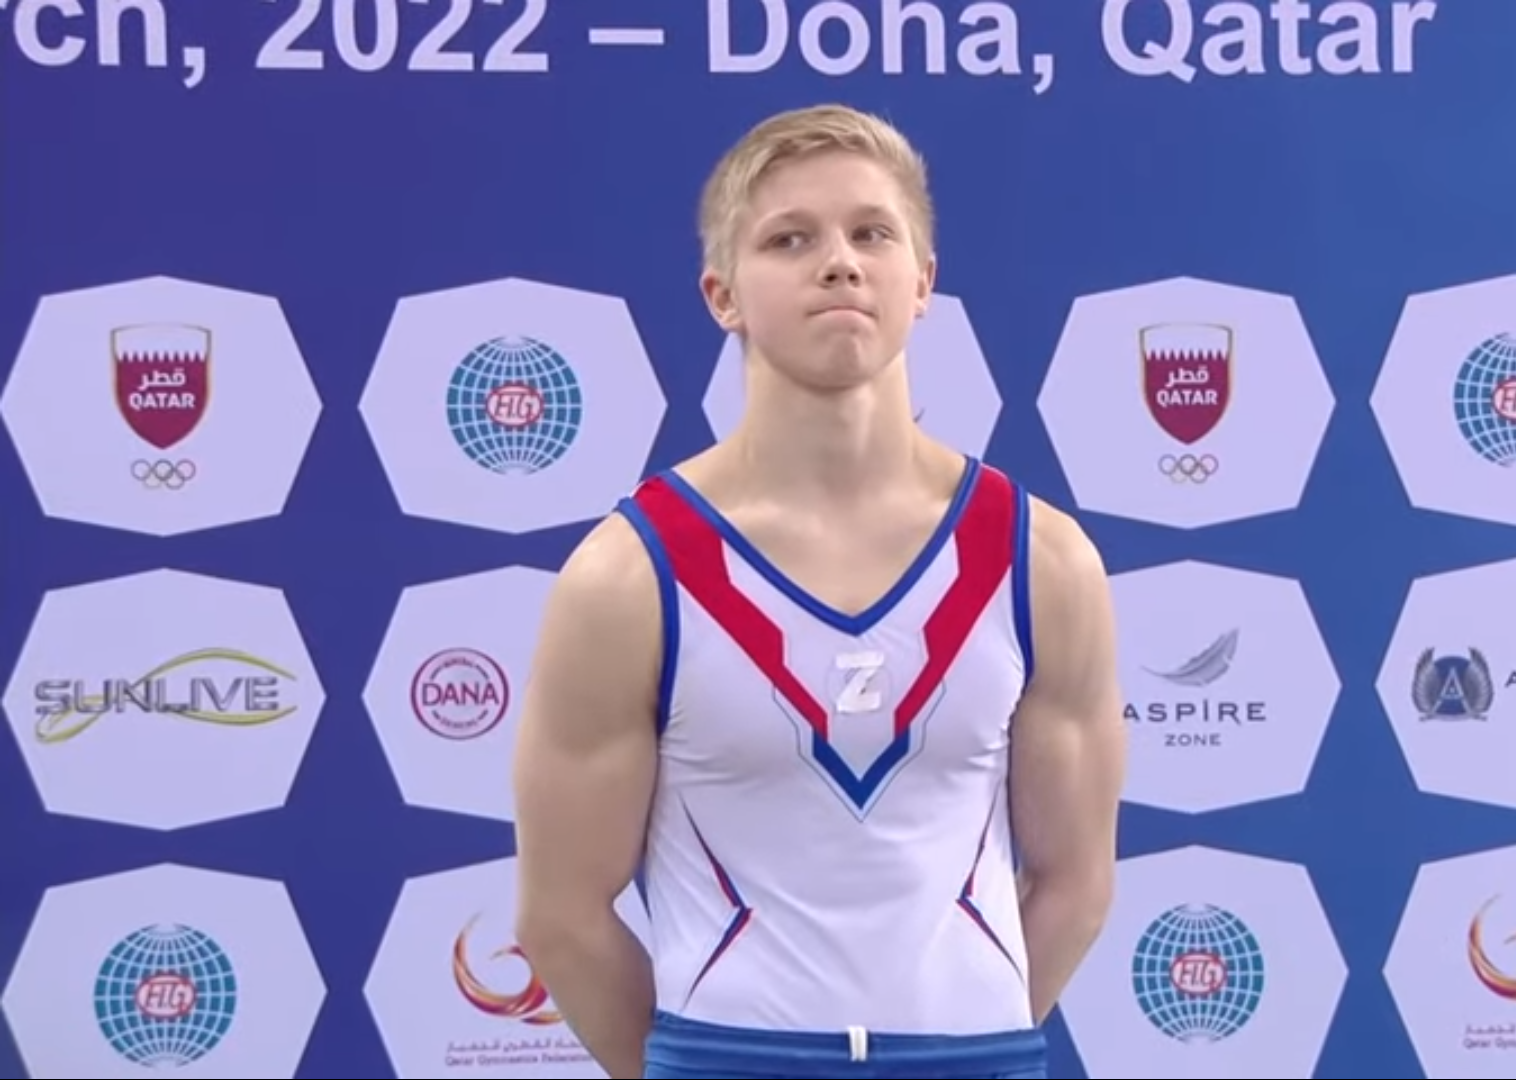 Russian gymnast Ivan Kuliak has filed an appeal against his suspension ©YouTube